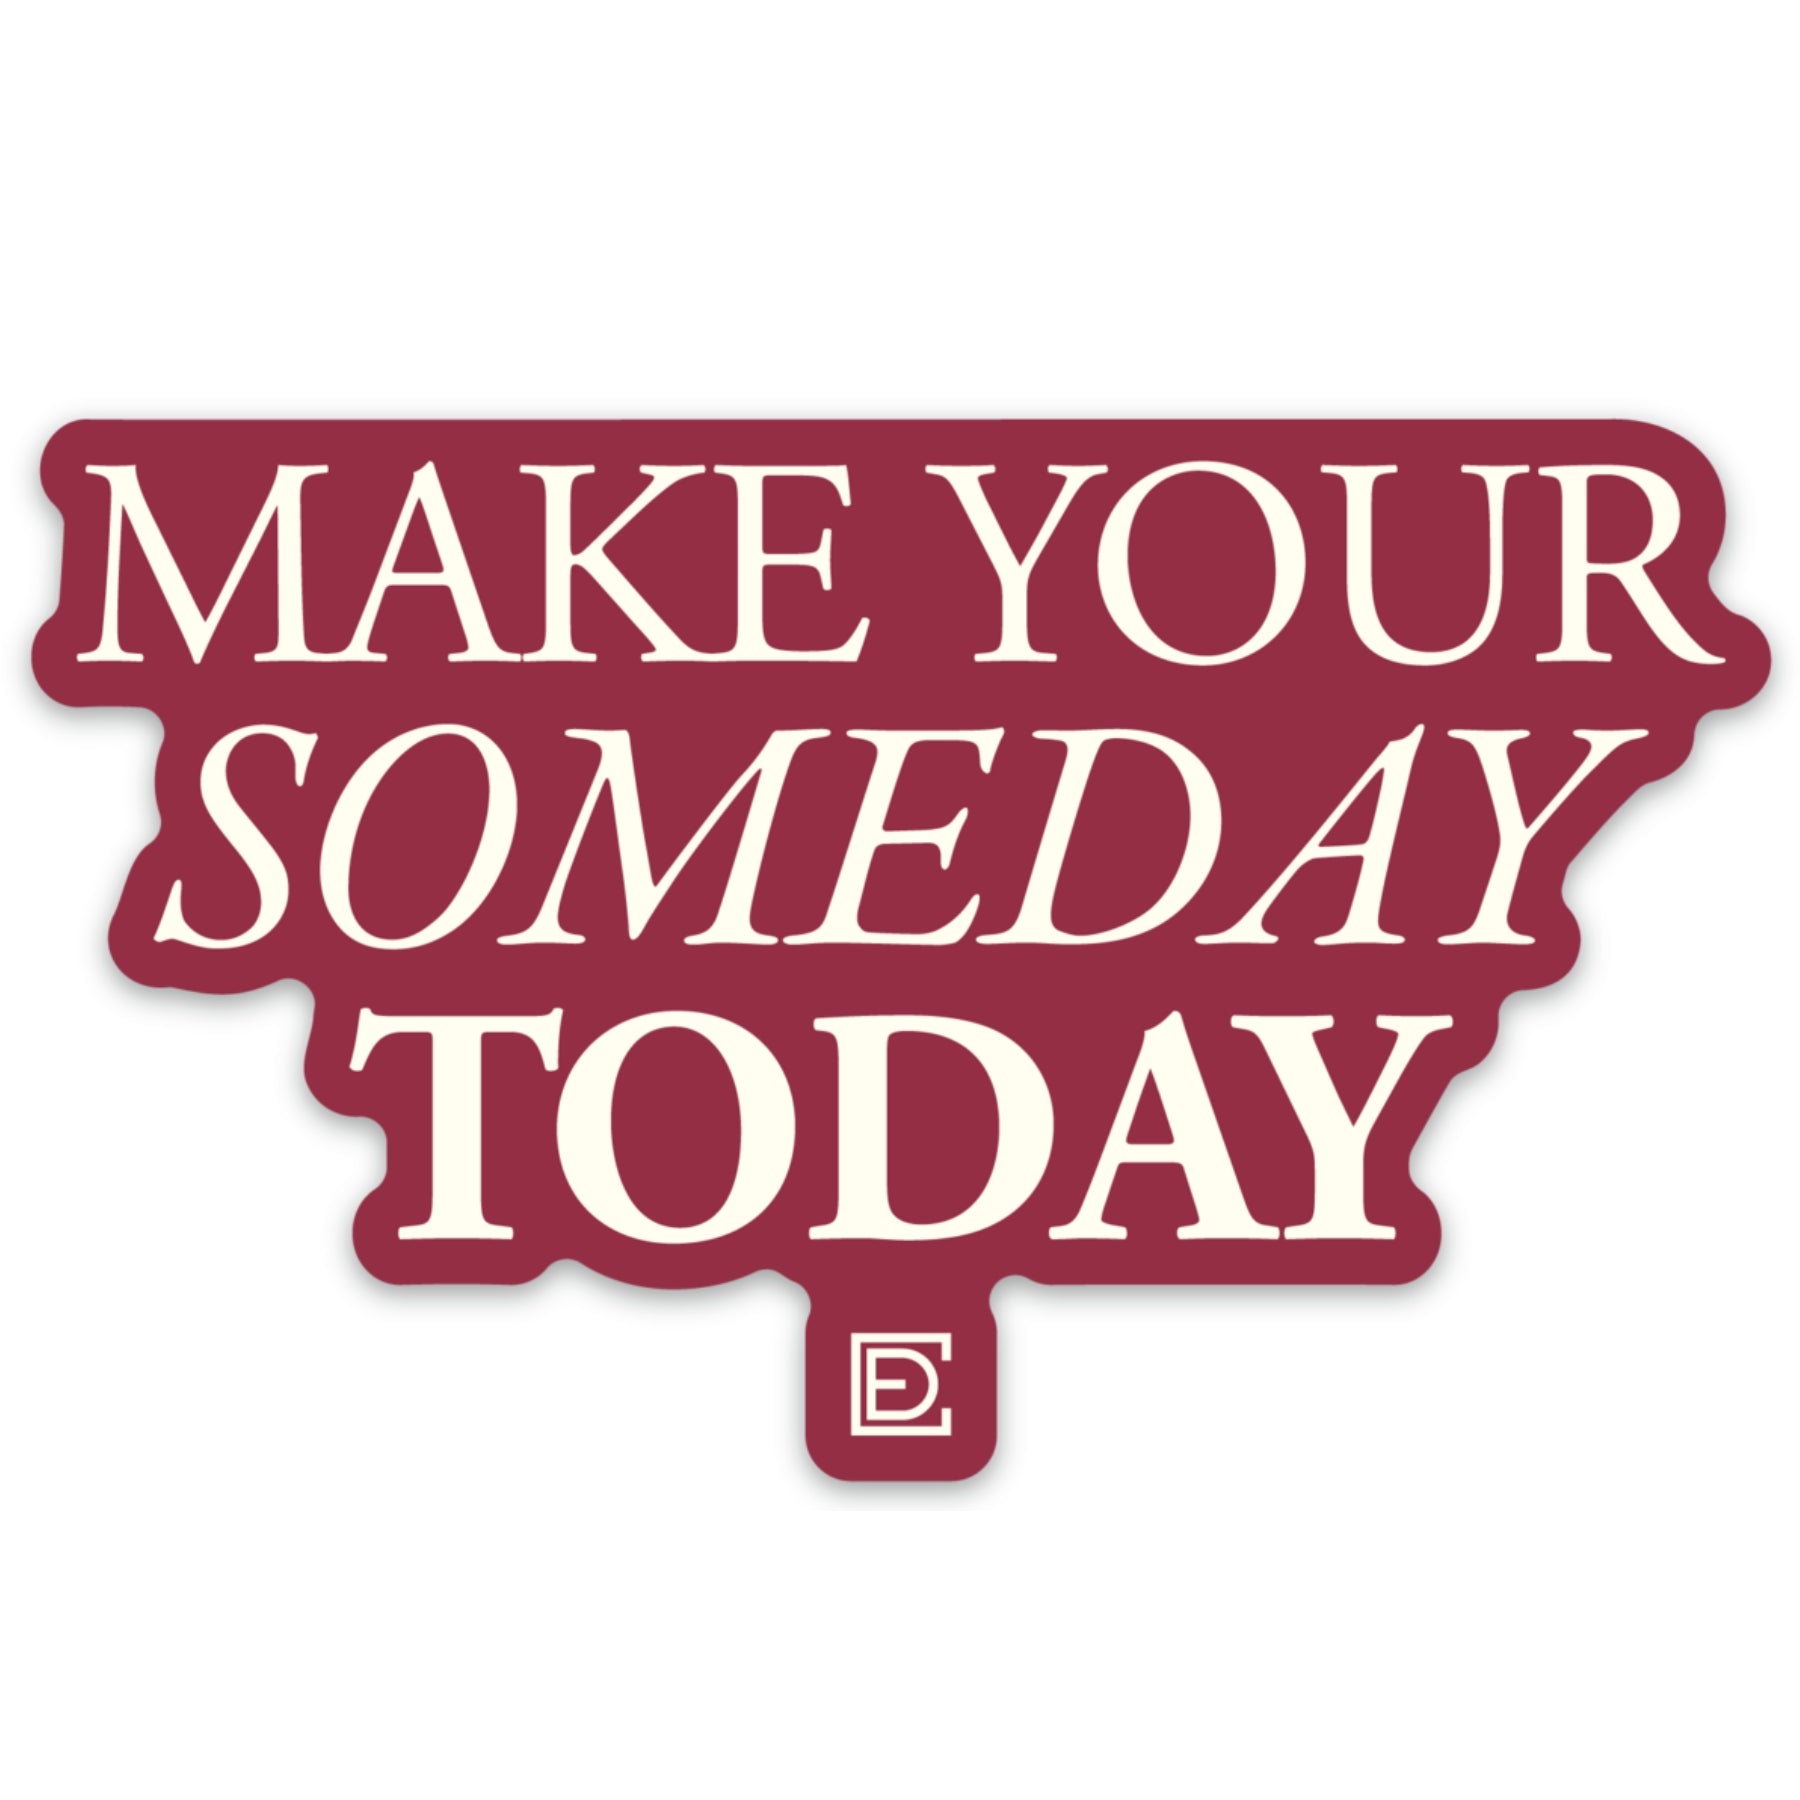 Make your someday today sticker